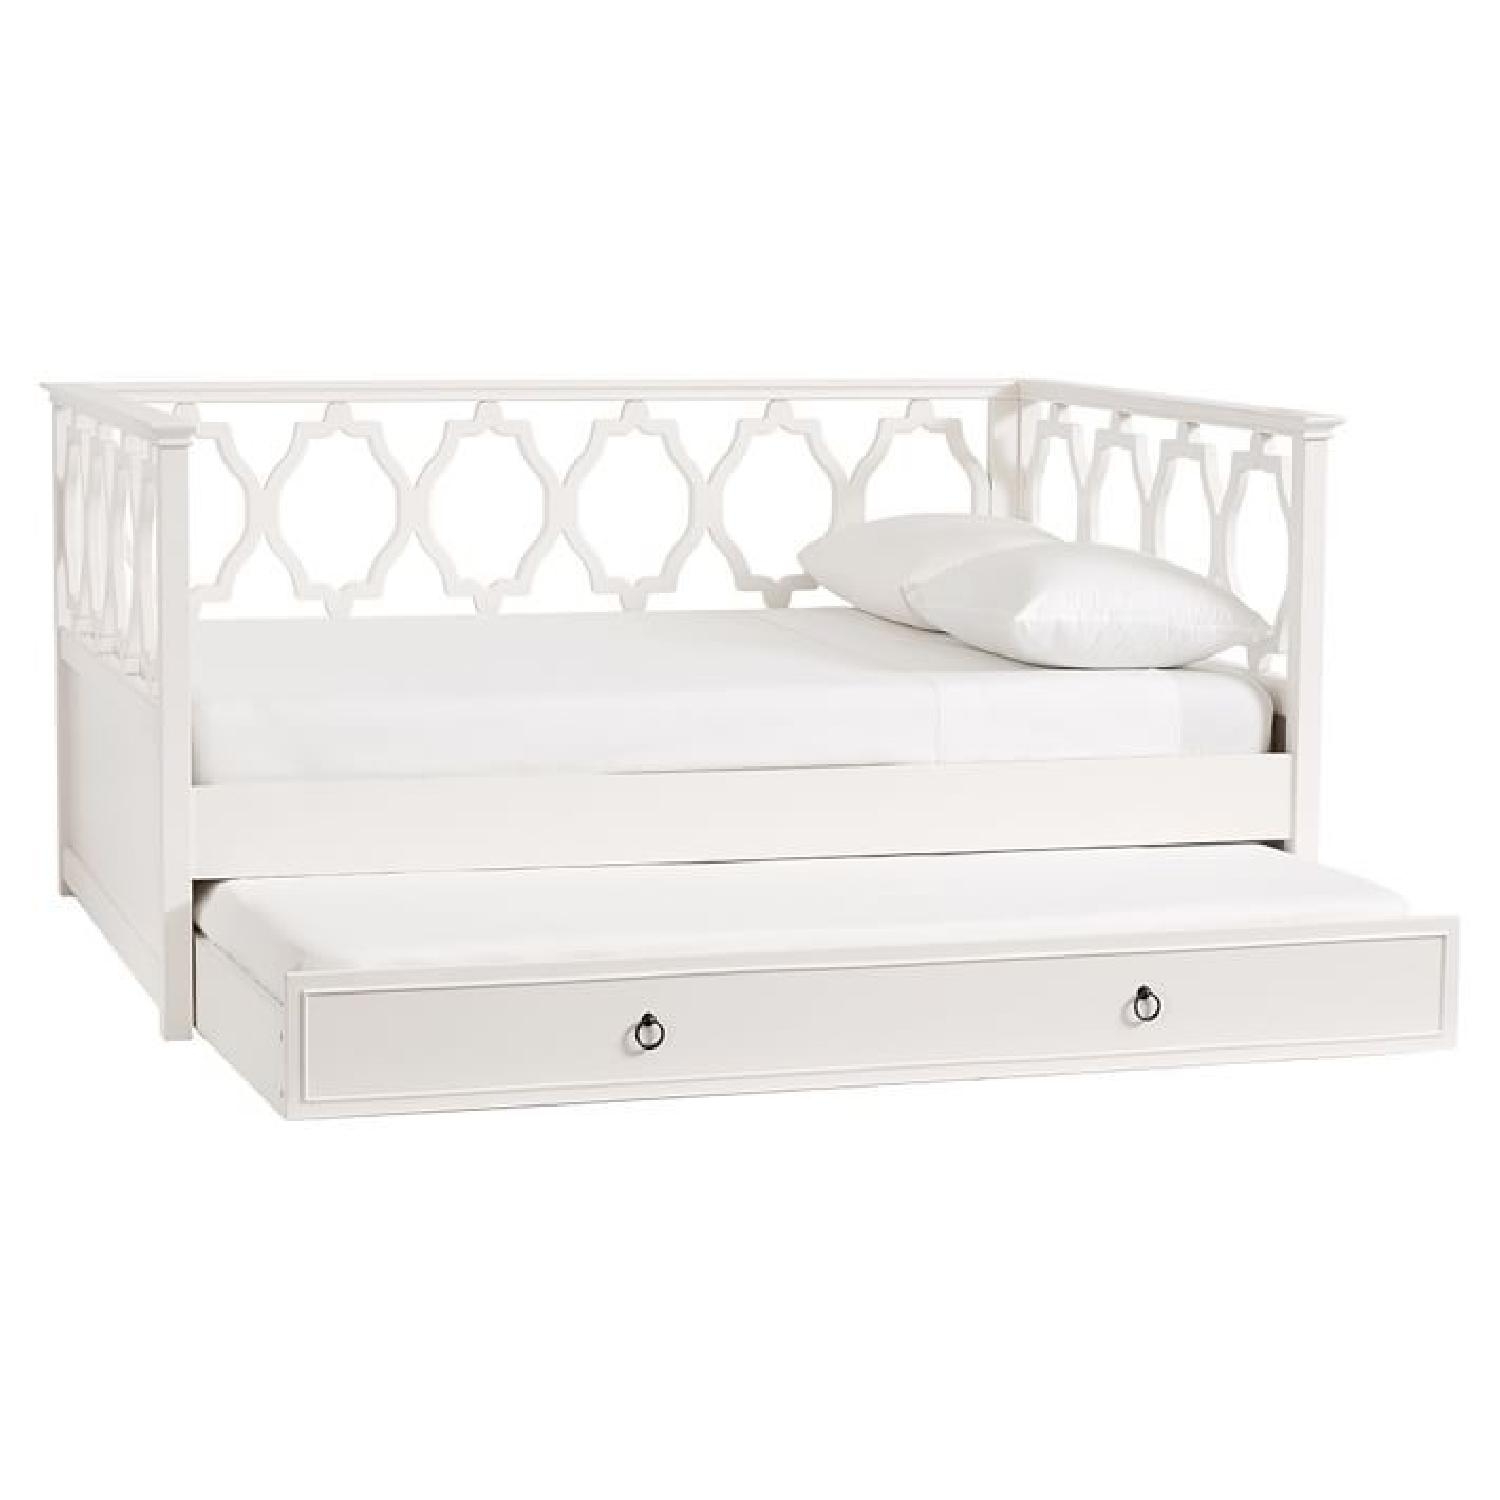 Full size bed with twin trundle